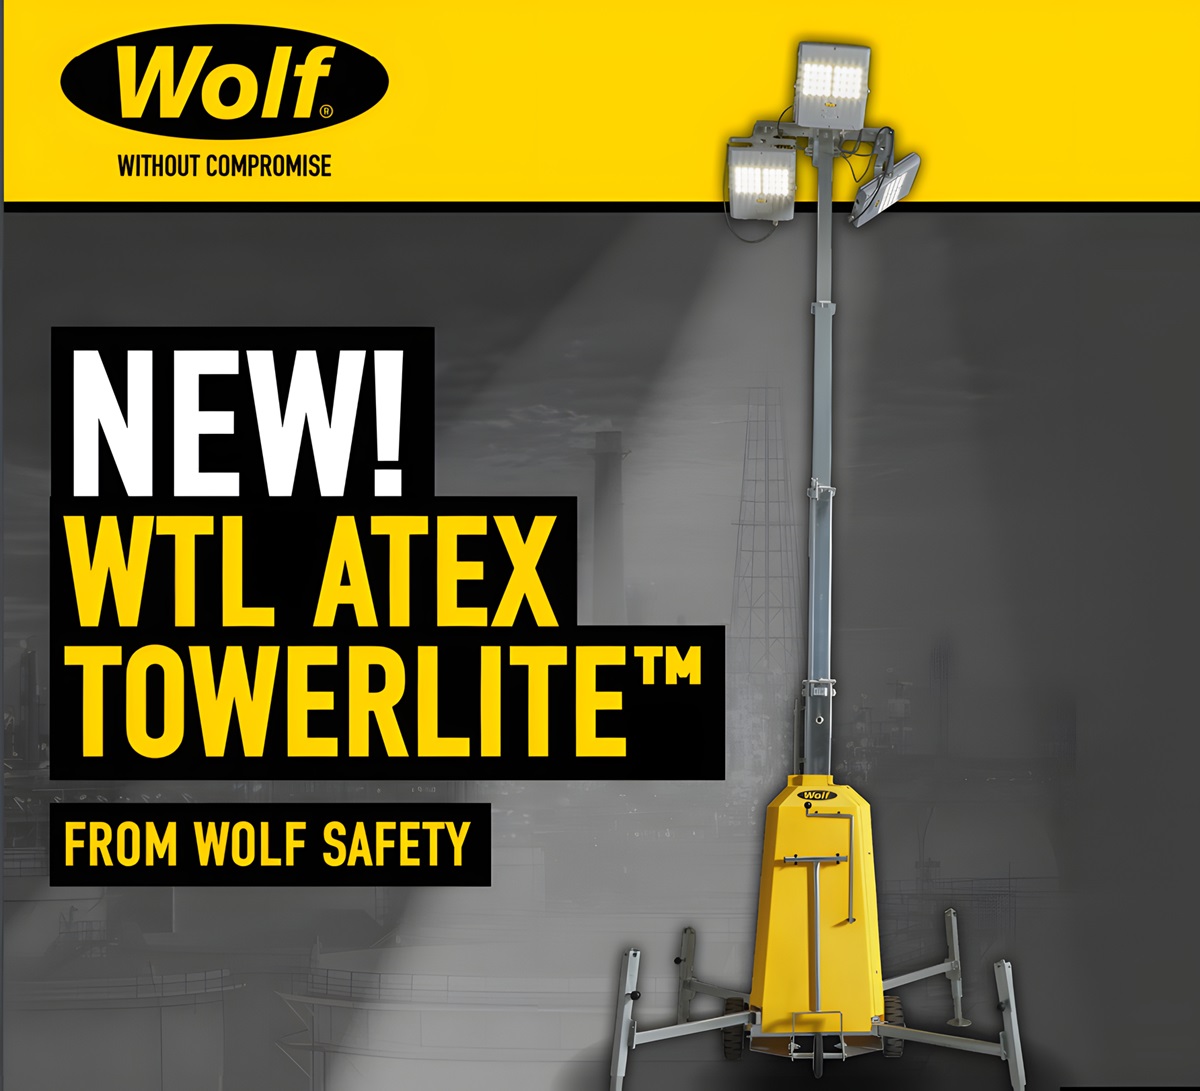 Wolf Safety Lamp Company Introduces ATEX, IECEx and UKEX Zone 1,2/21,22 Certified Tower Light